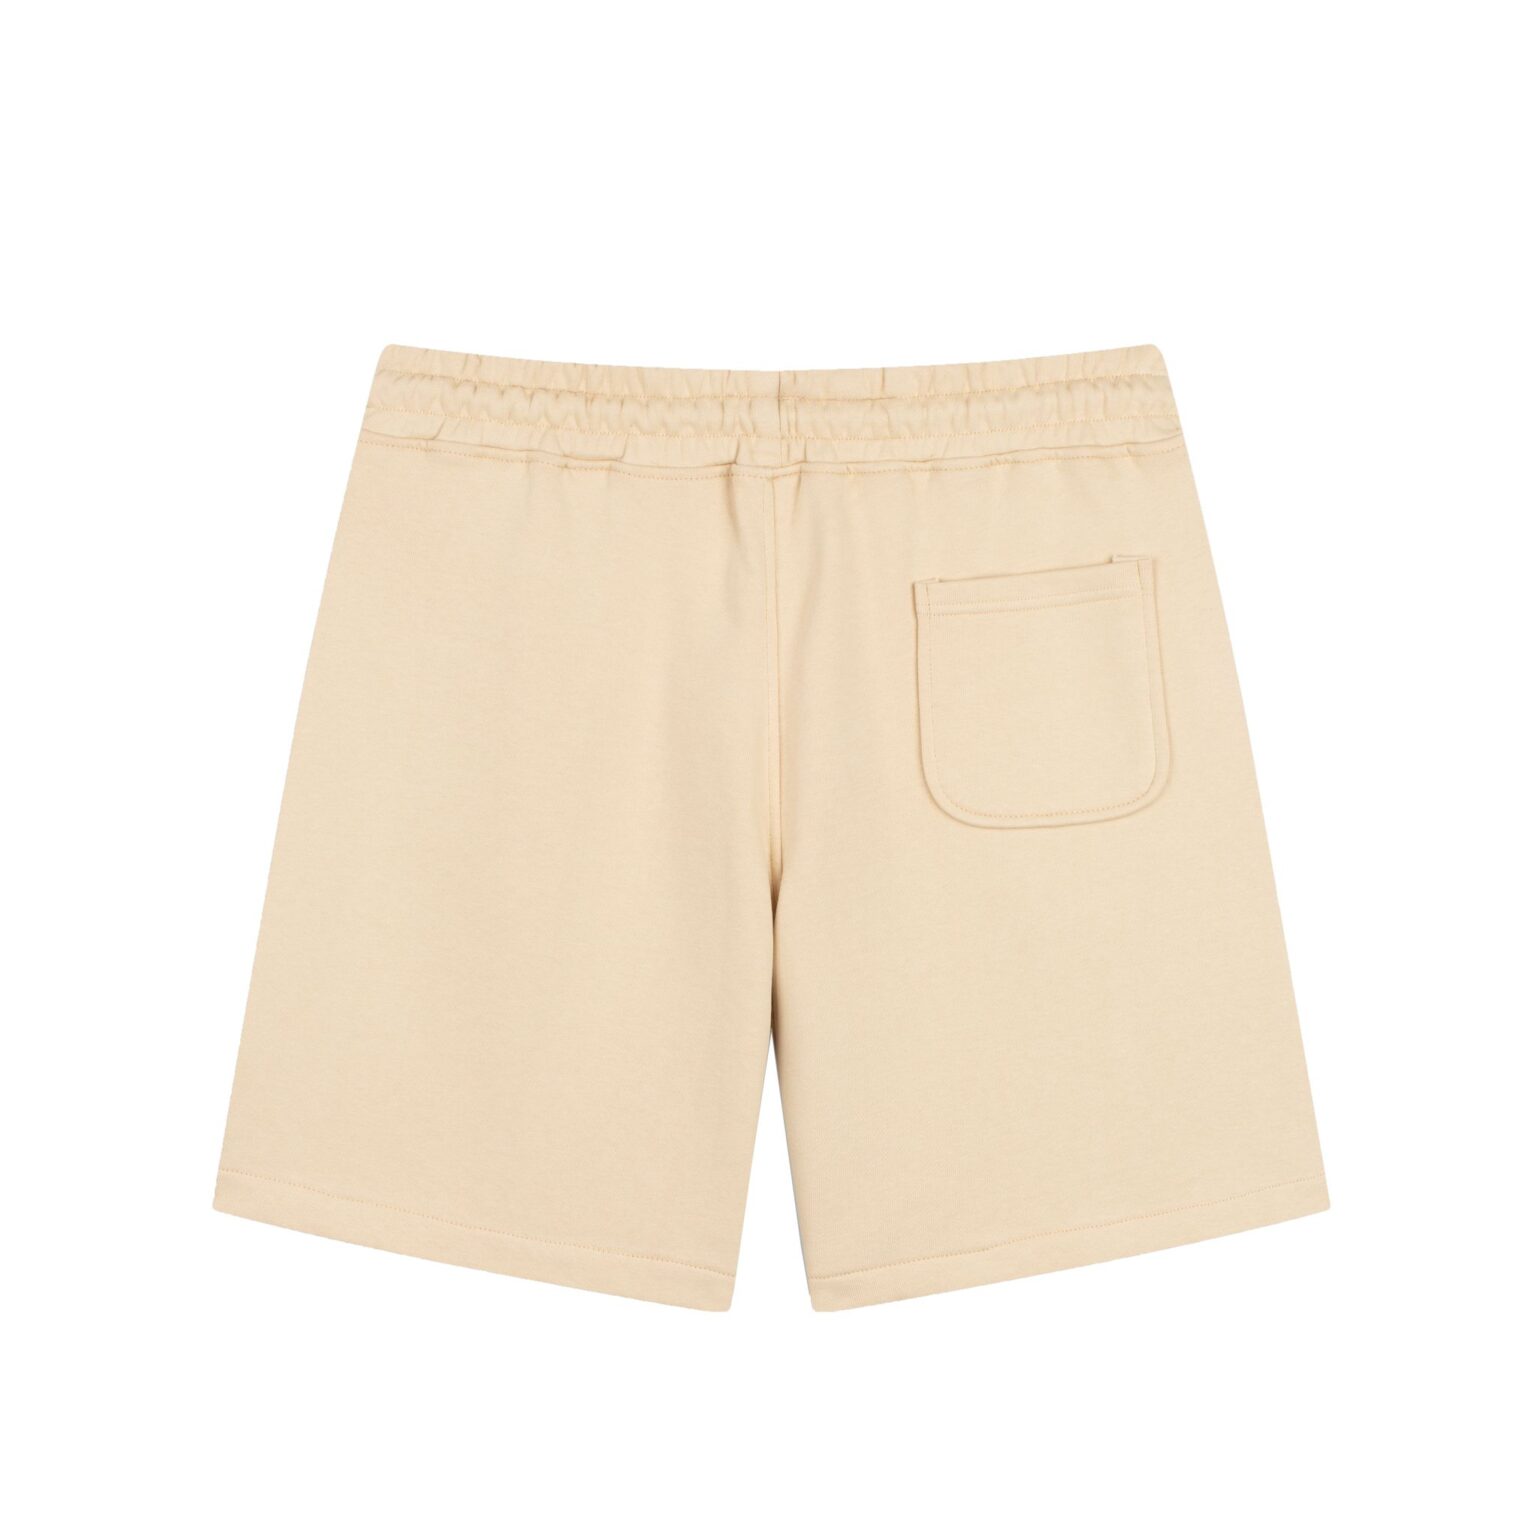 BUGS BUNNY SHORT – BEIGE - Mikenco® Official Site